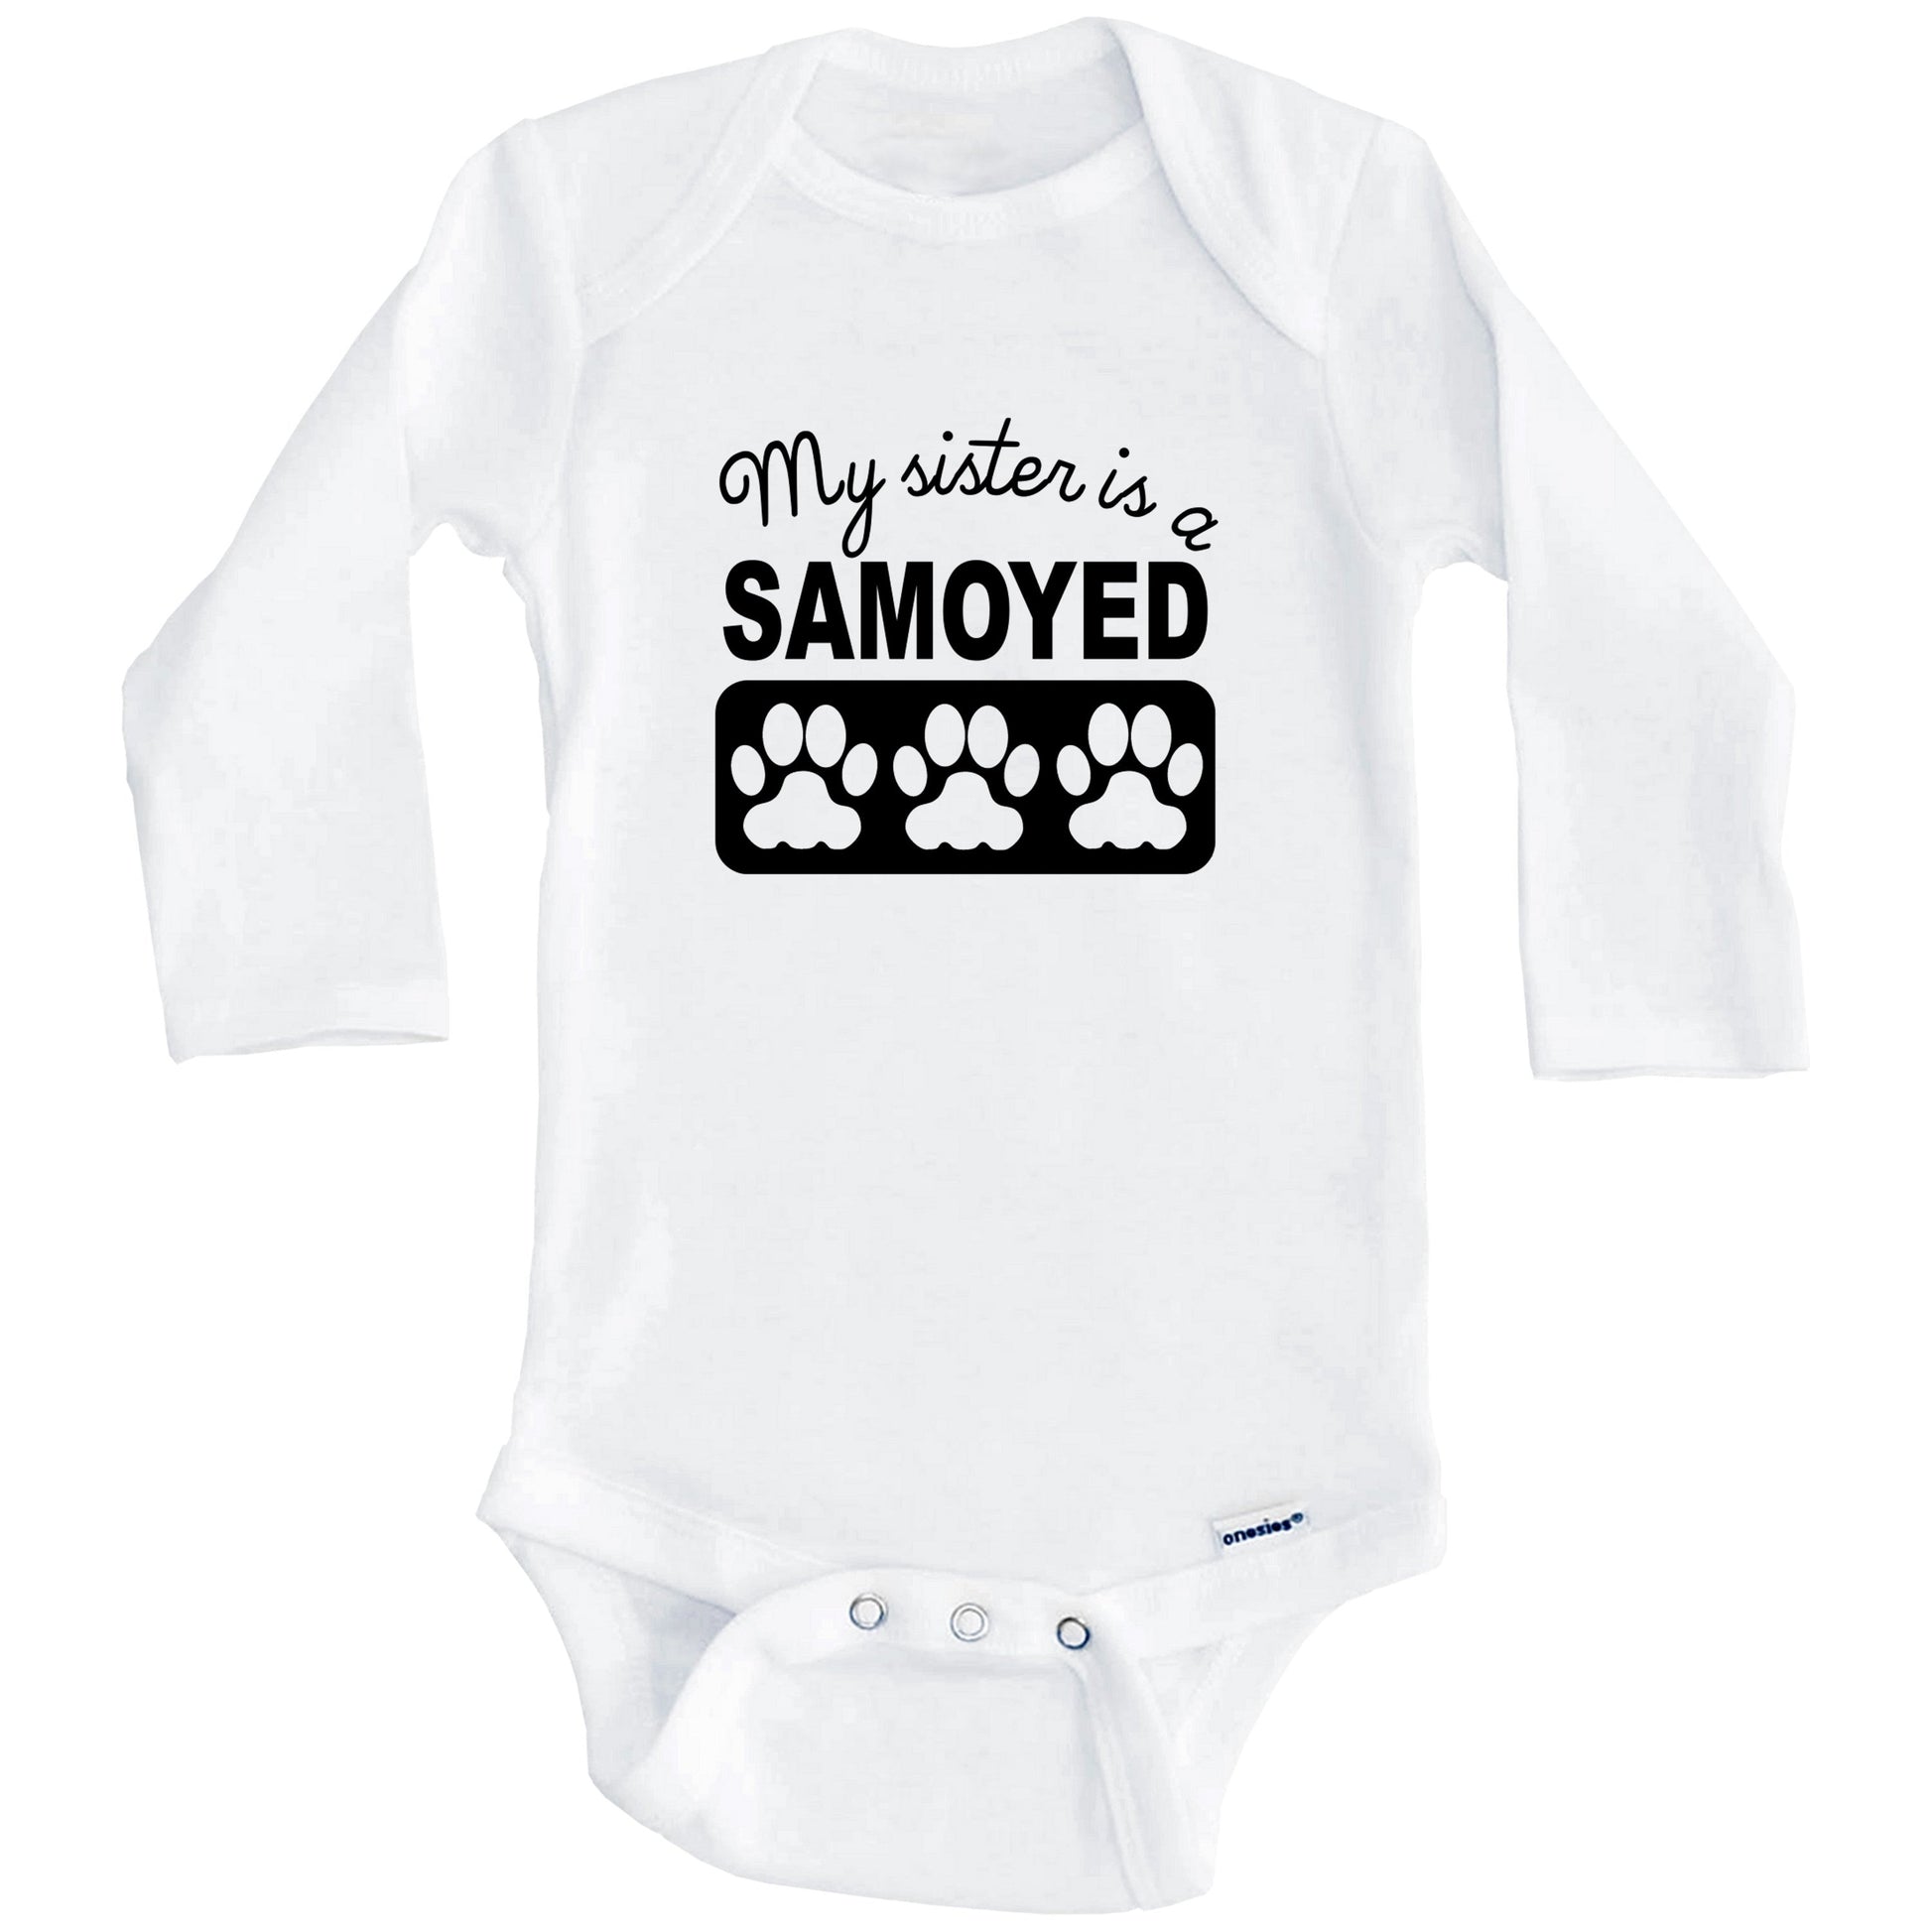 My Sister Is A Samoyed Baby Onesie (Long Sleeves)